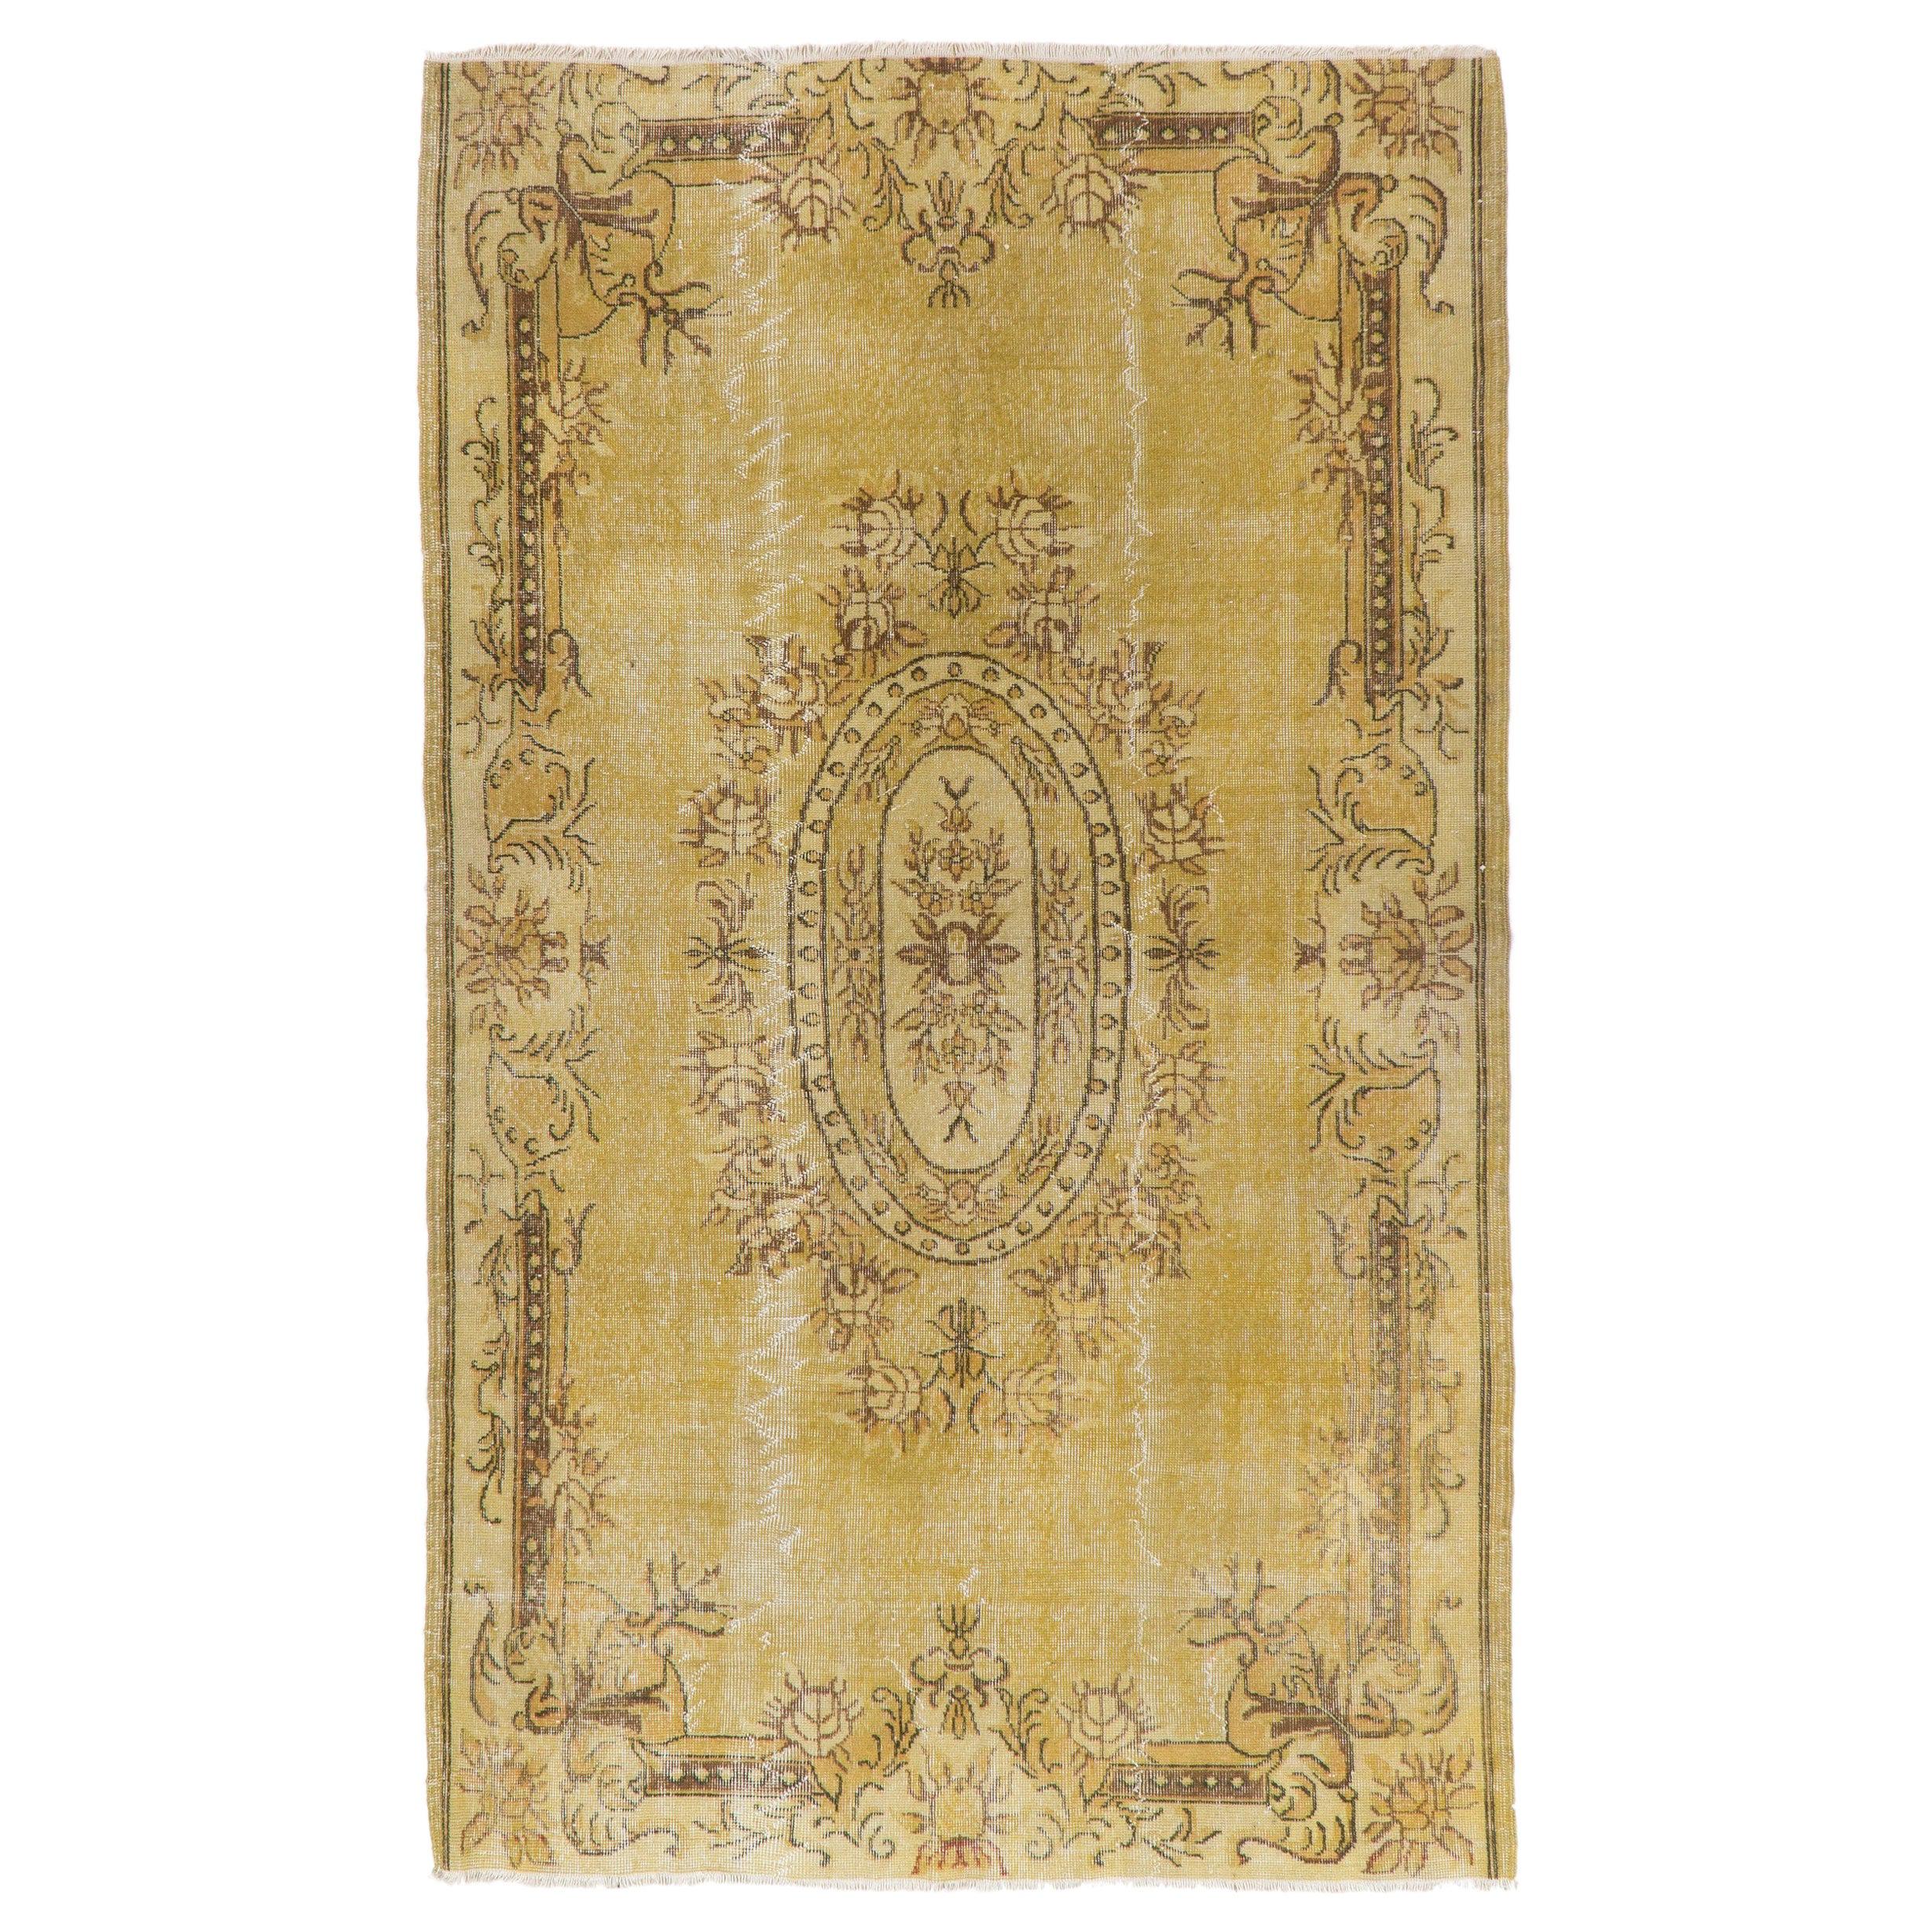 5.2x9 Ft Handmade Vintage Baroque Style Area Rug in Yellow. Modern Wool Carpet